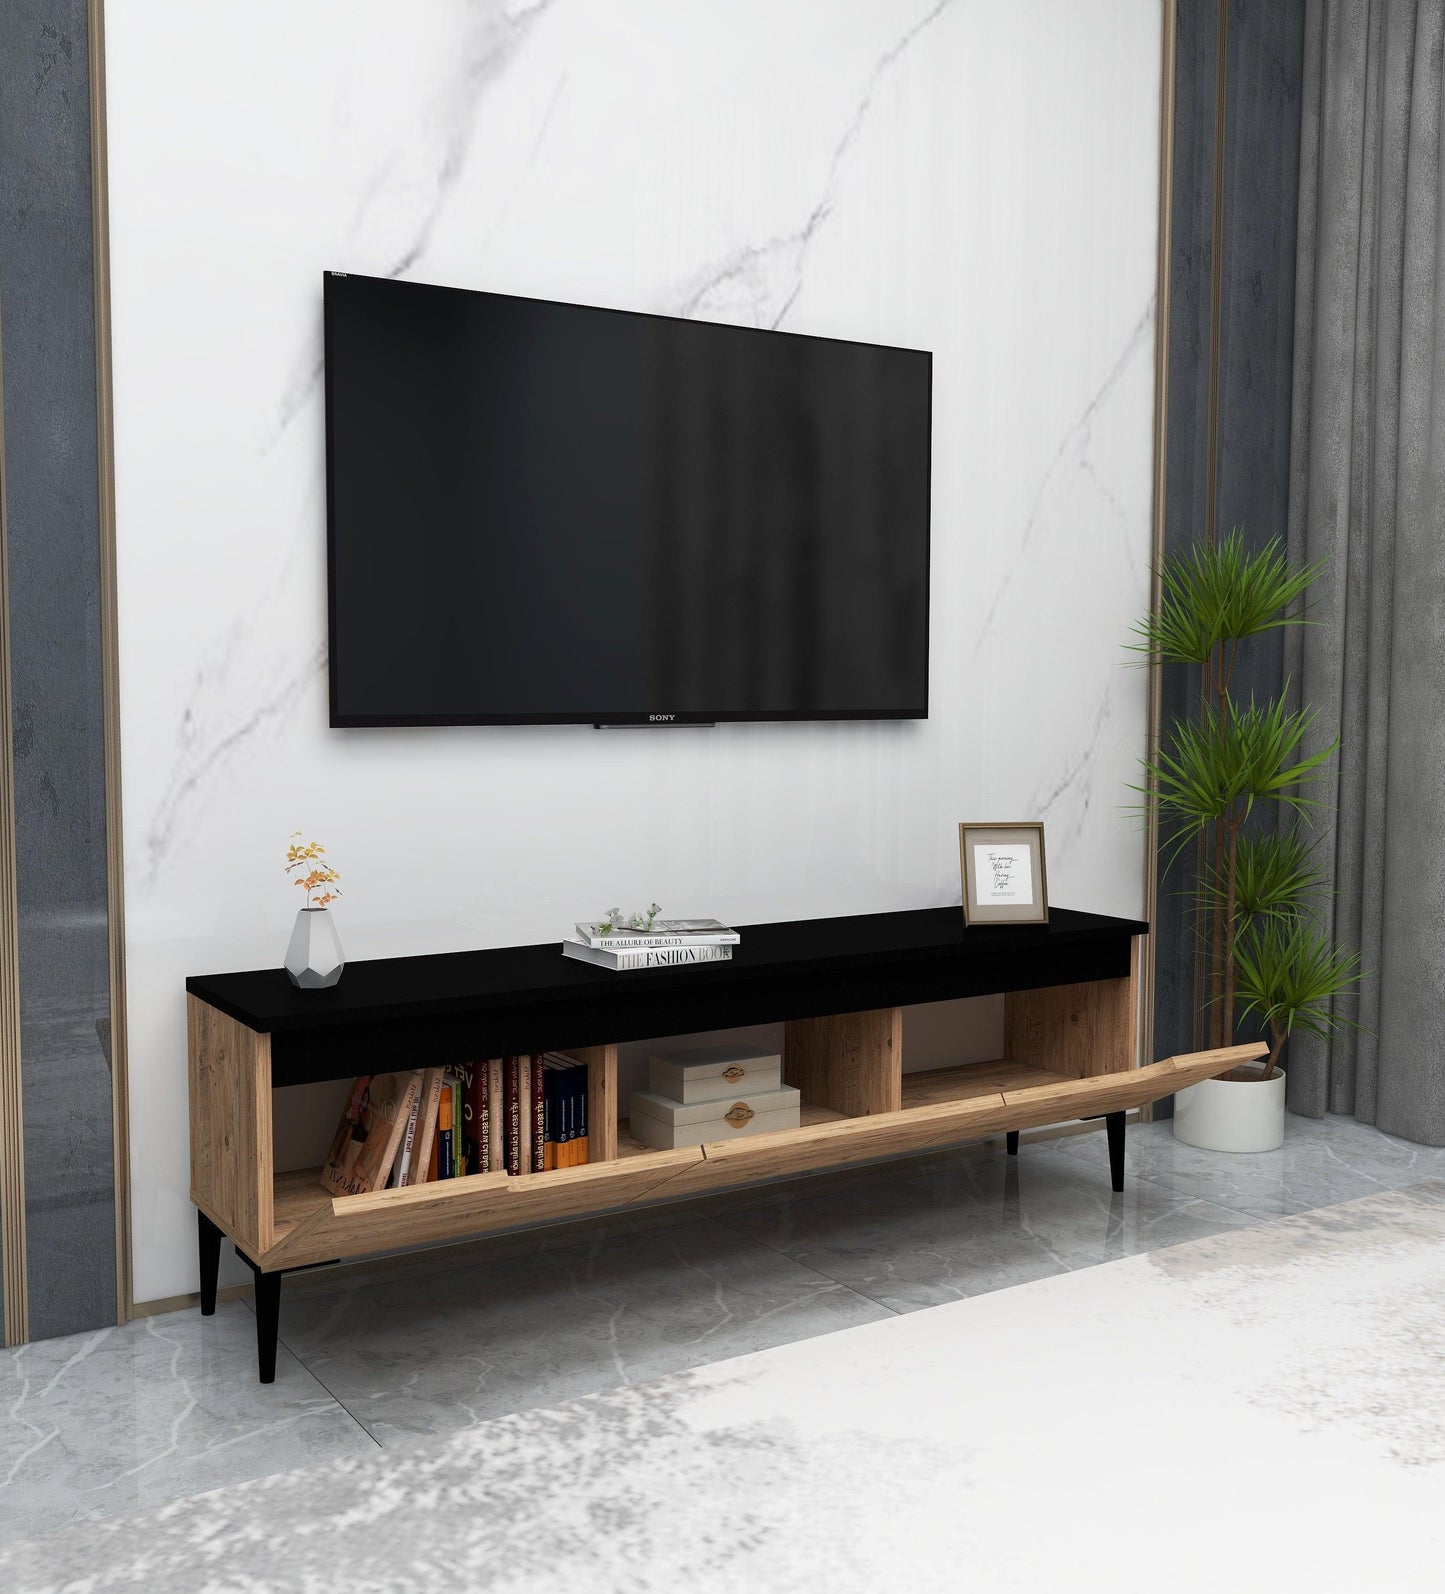 Amiray TV Stand with Cabinets - Destina Home, TV Stand, Media Console, TV cabinet, Wooden TV Stand, Media Stand, TV Lowboard, Entertainment Center, Wood TV Unit, TV Board, TV Table, Media Center, Living Room, Furniture